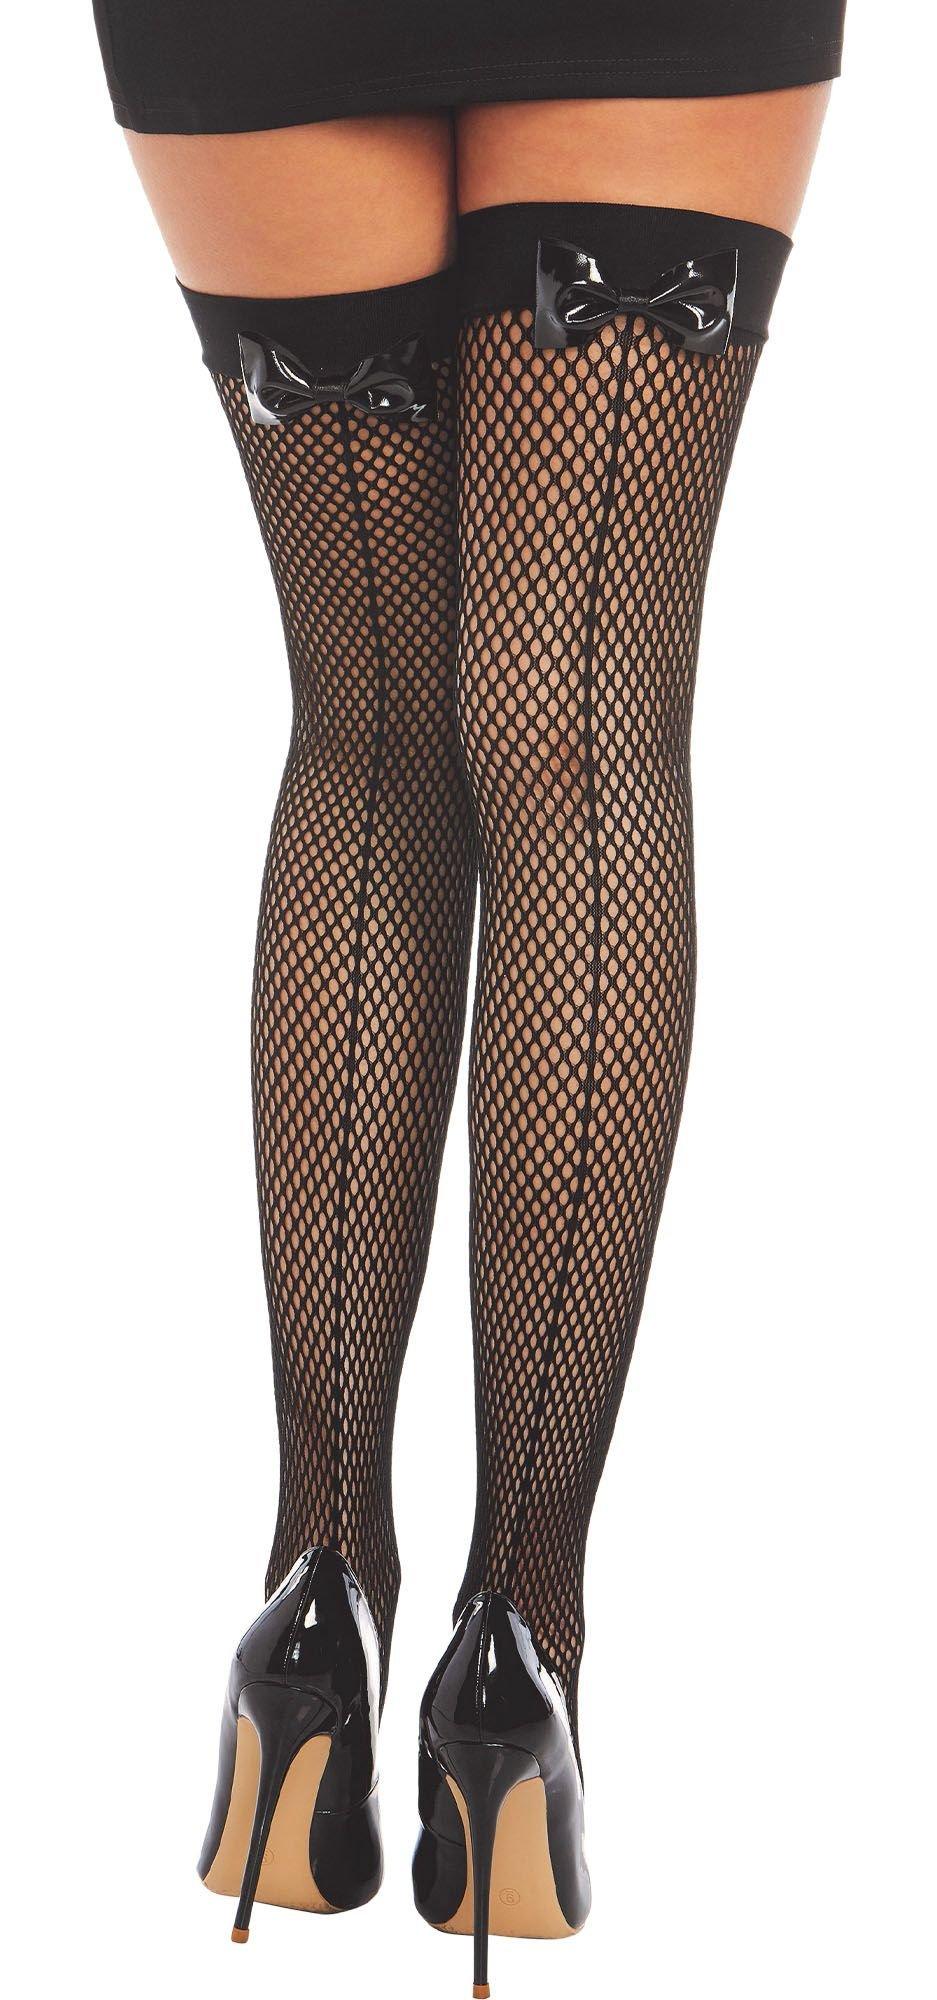  3 Pairs Women Thigh High Stockings over the Knee Rhinestone  Fishnets Black Elastic Fishnet Stockings Mesh High Socks Fish Net Tights  Pantyhose for Party Carnival Accessories: Clothing, Shoes & Jewelry